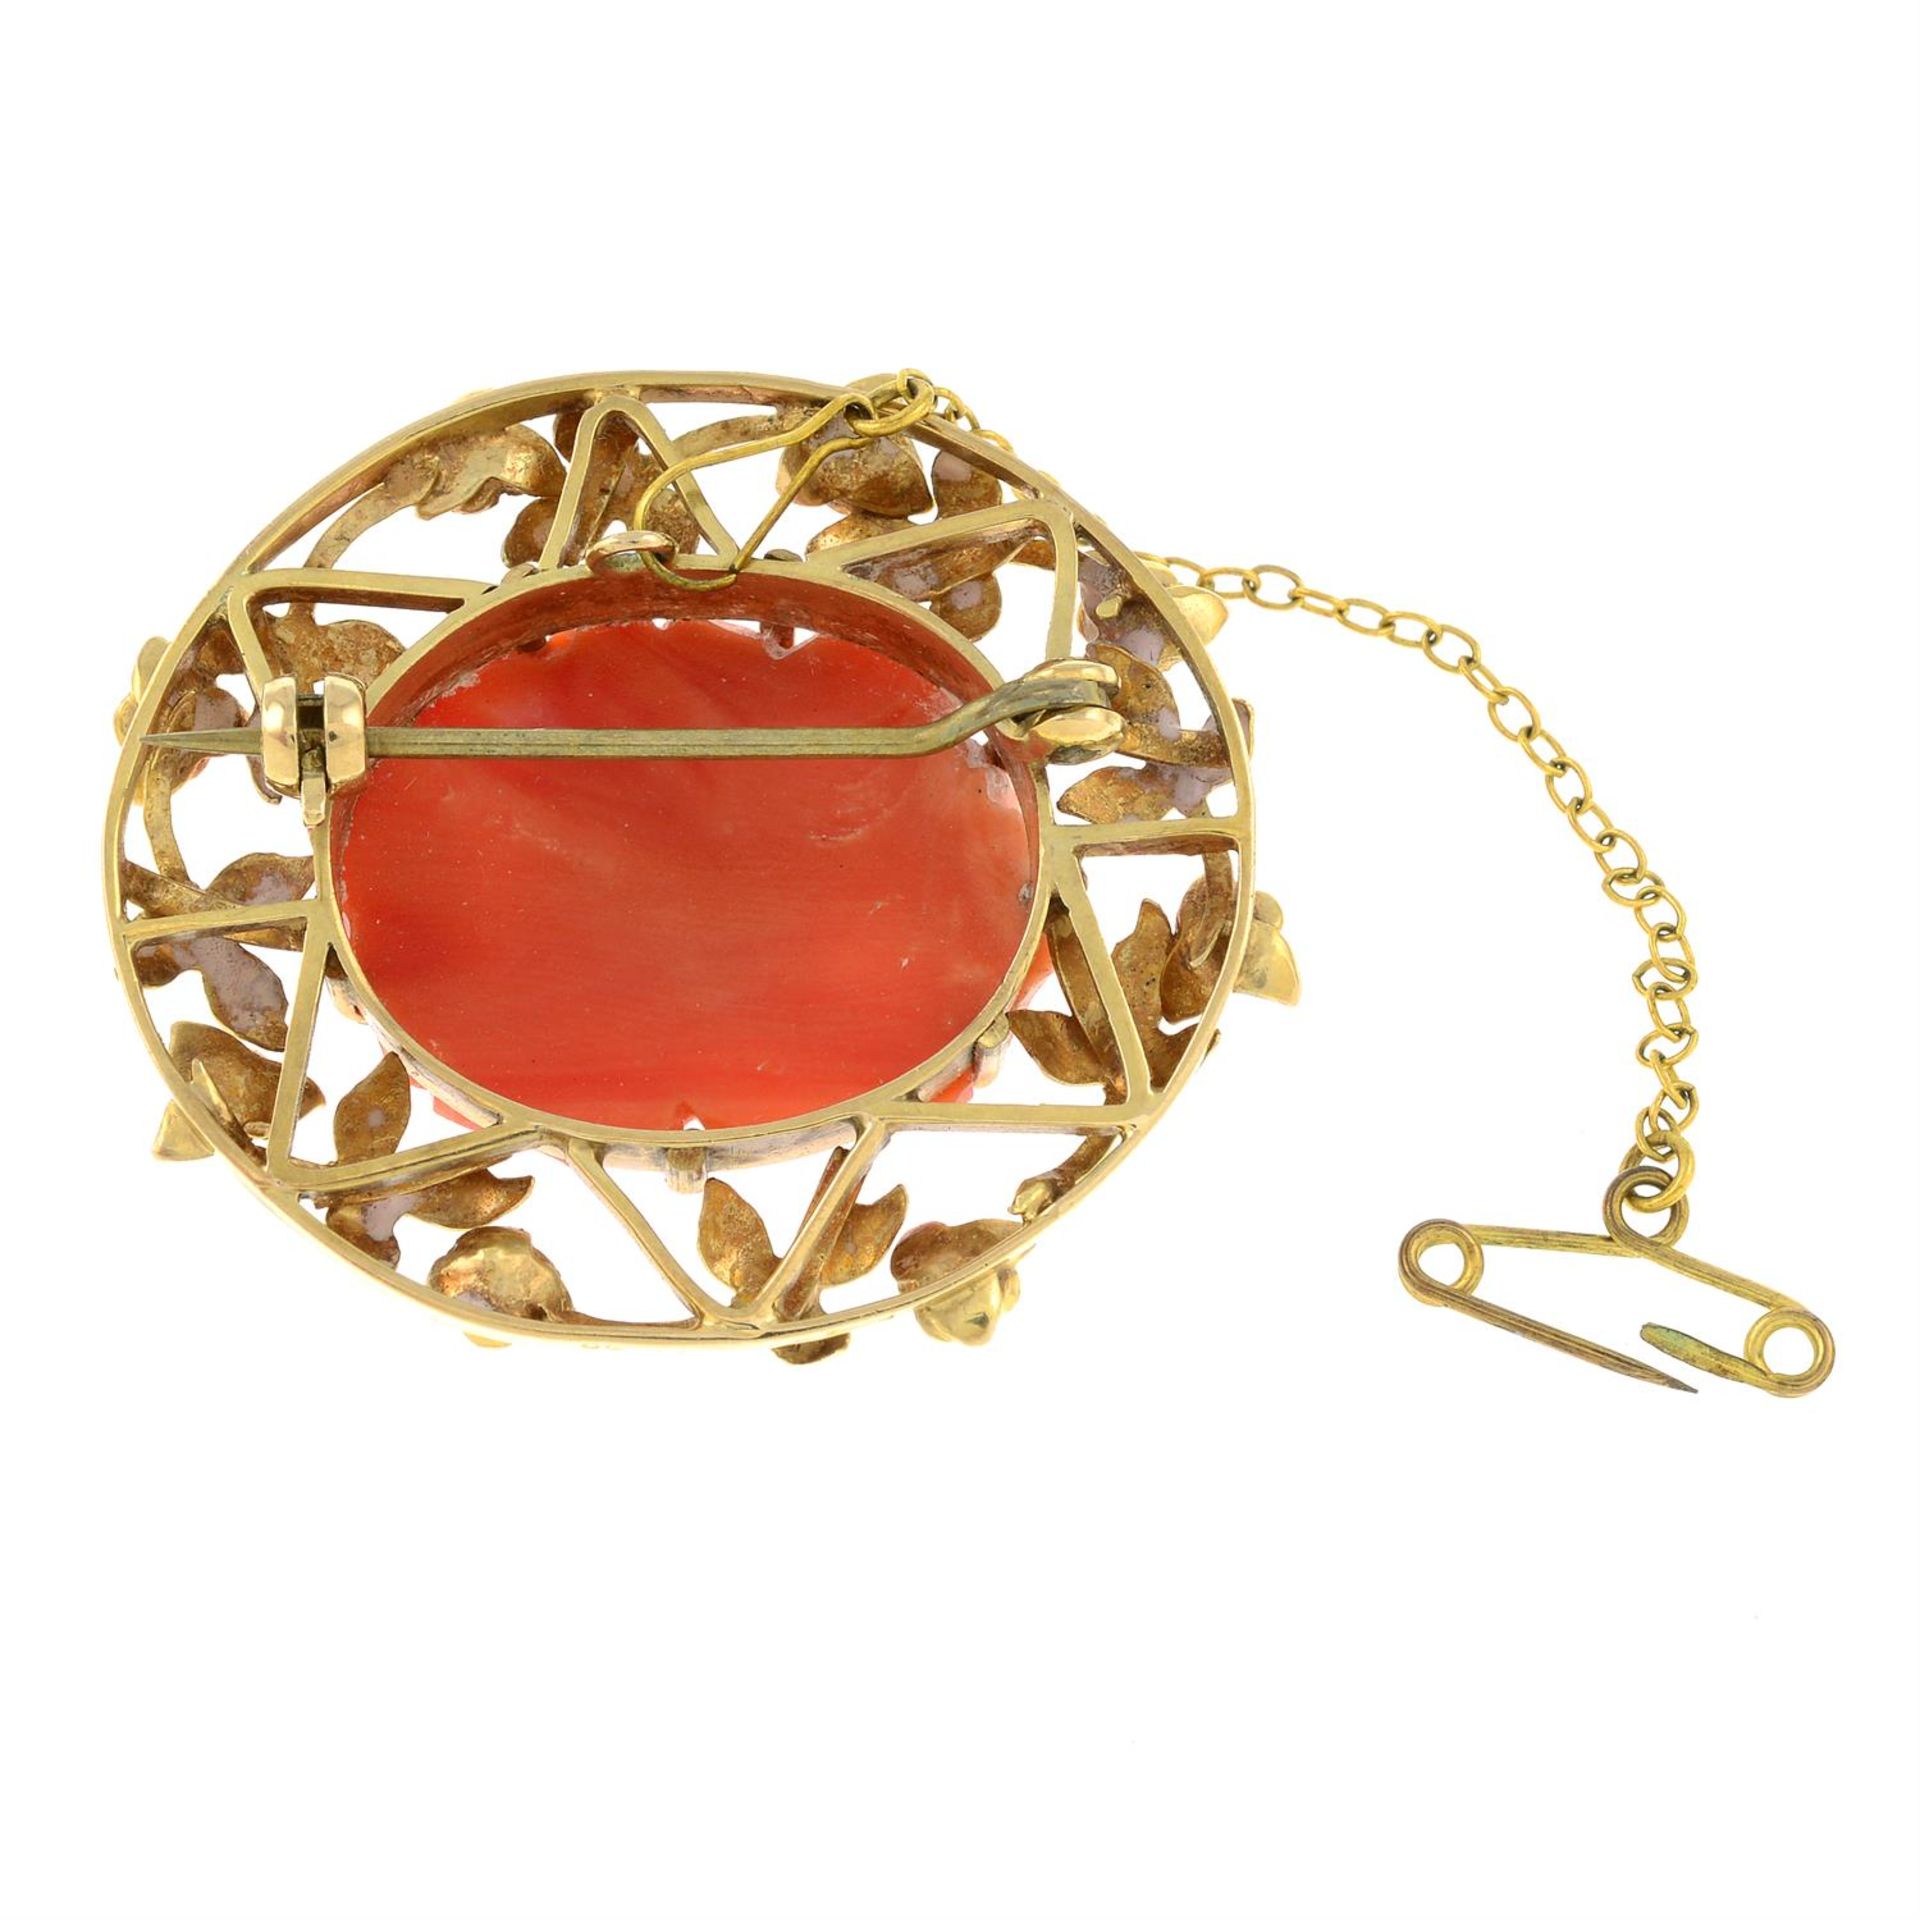 A 1960s carved coral rose brooch. - Image 2 of 2